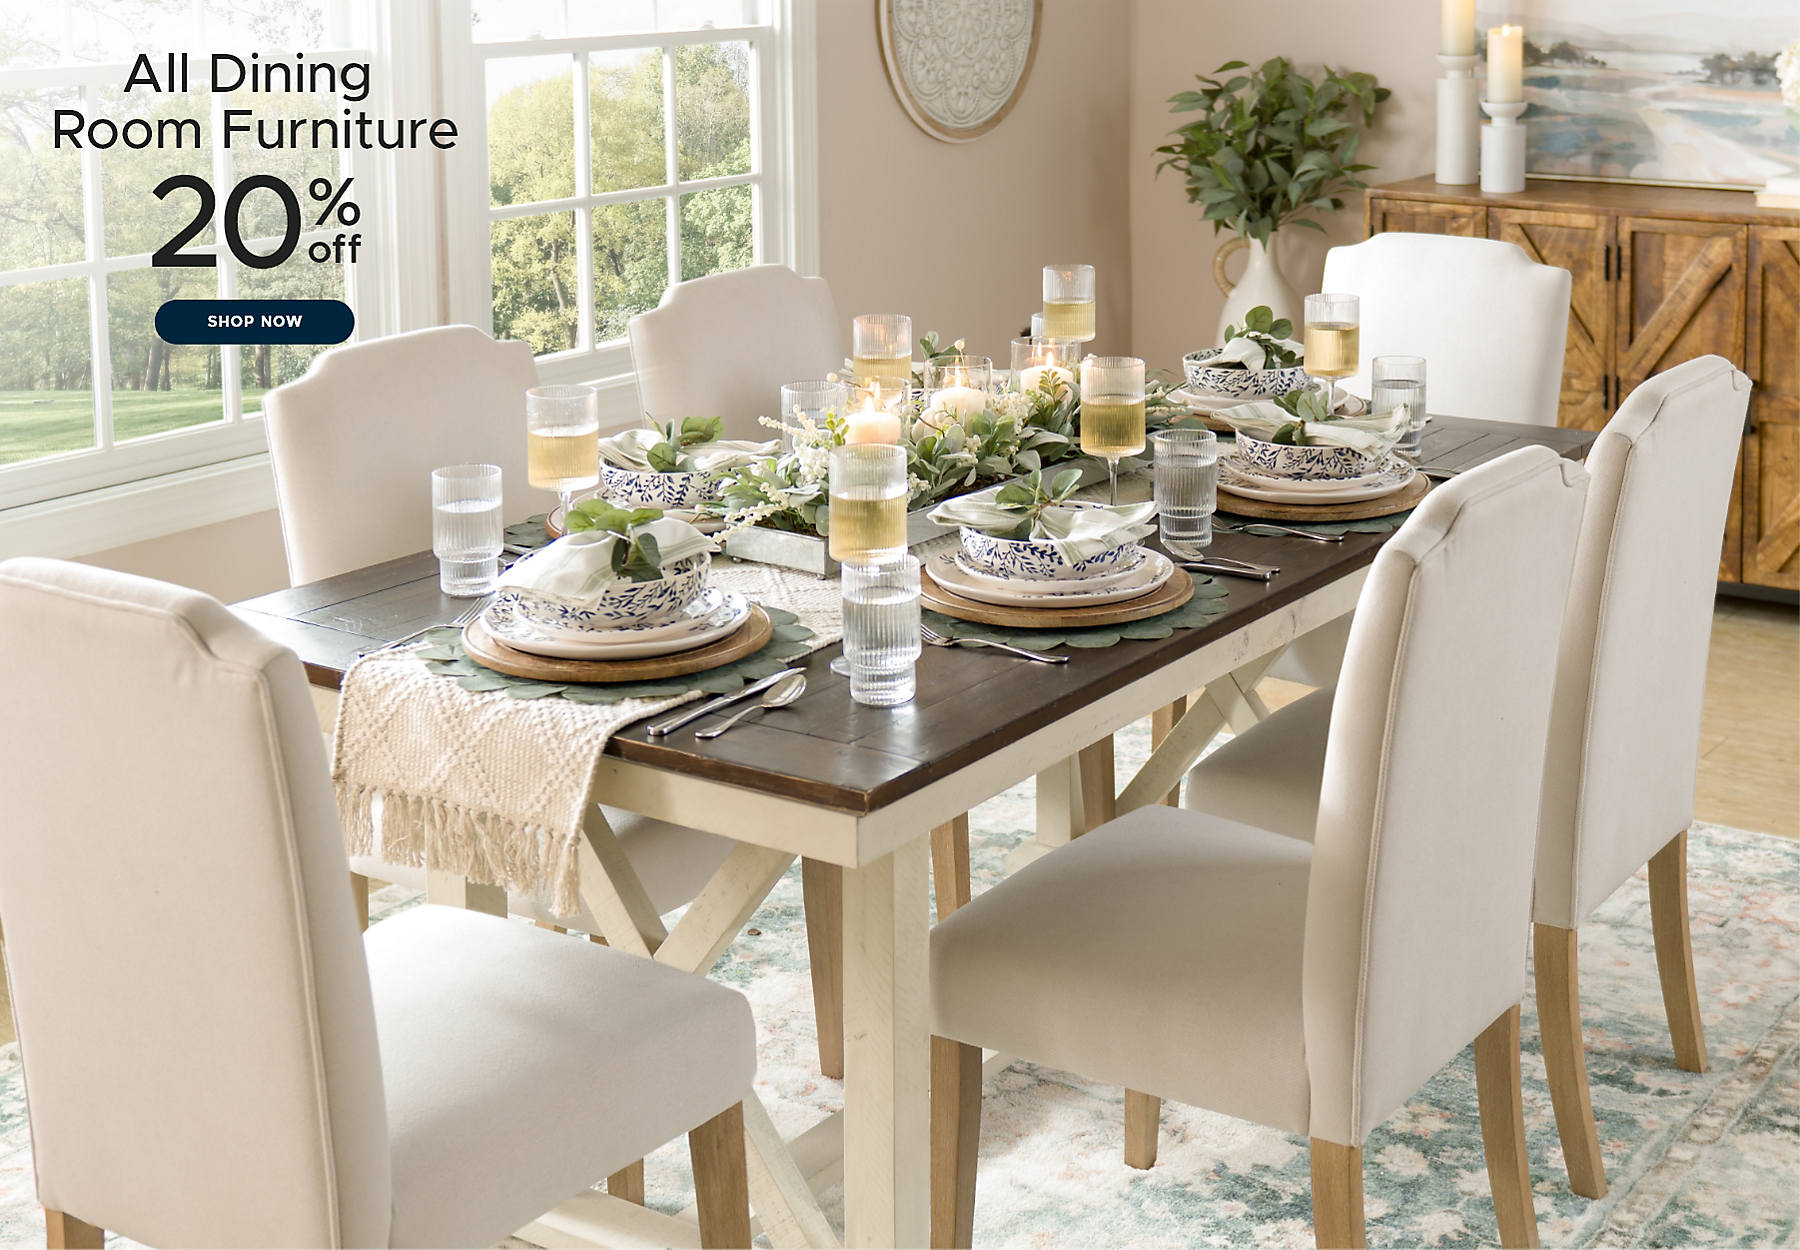 Dining Room Furniture 20% off shop now